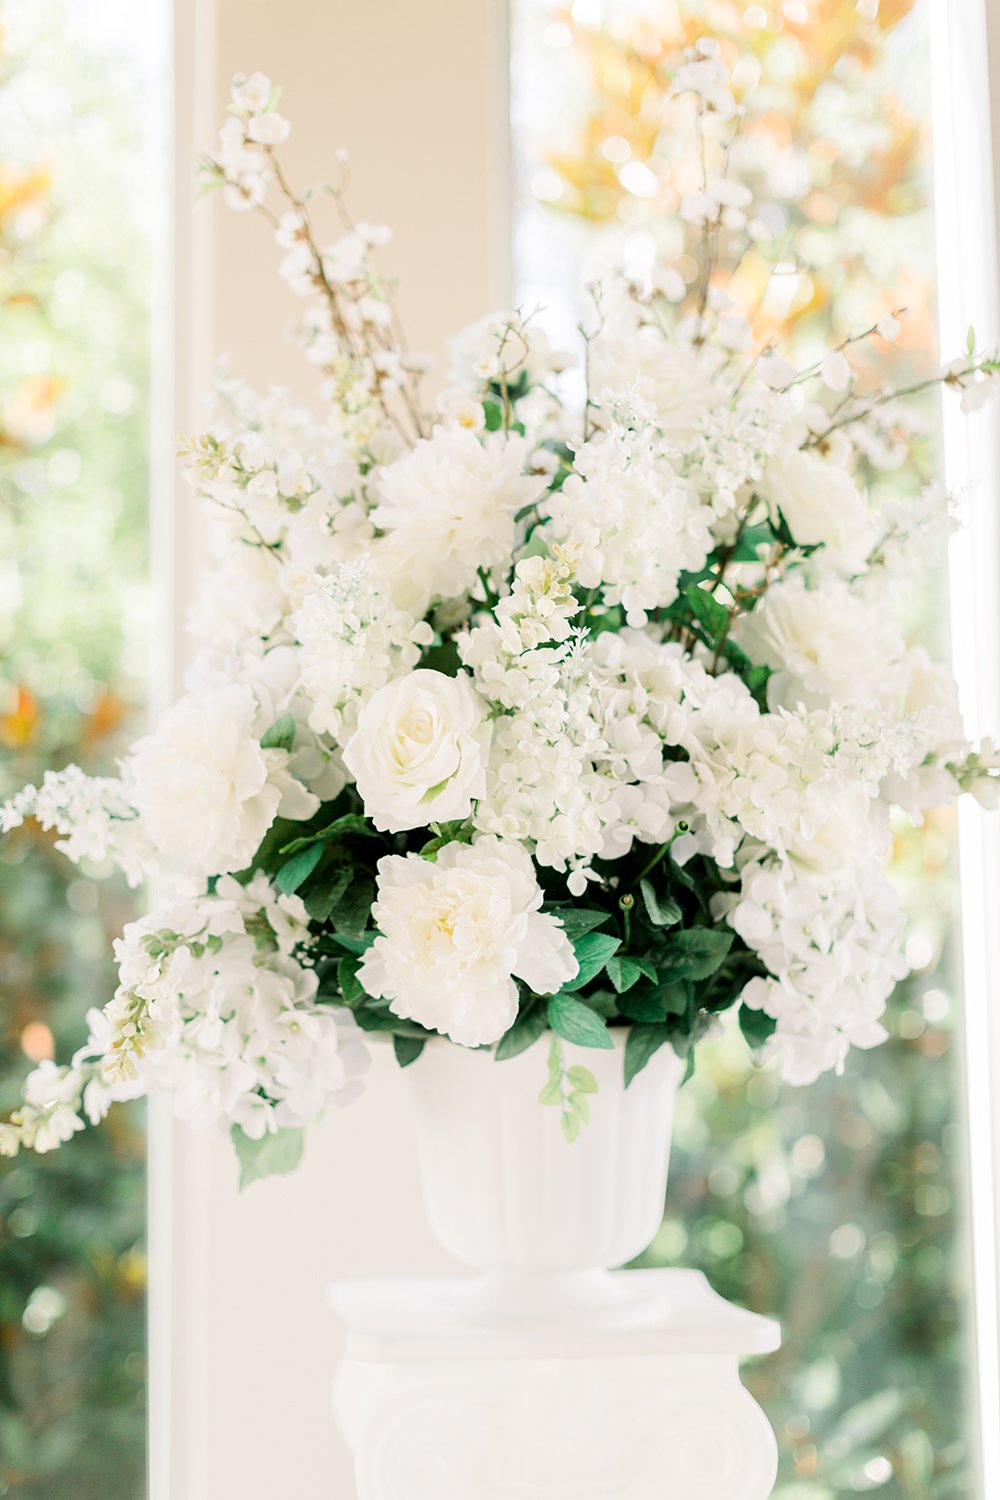 flowers - centerpieces - white - green - ivory